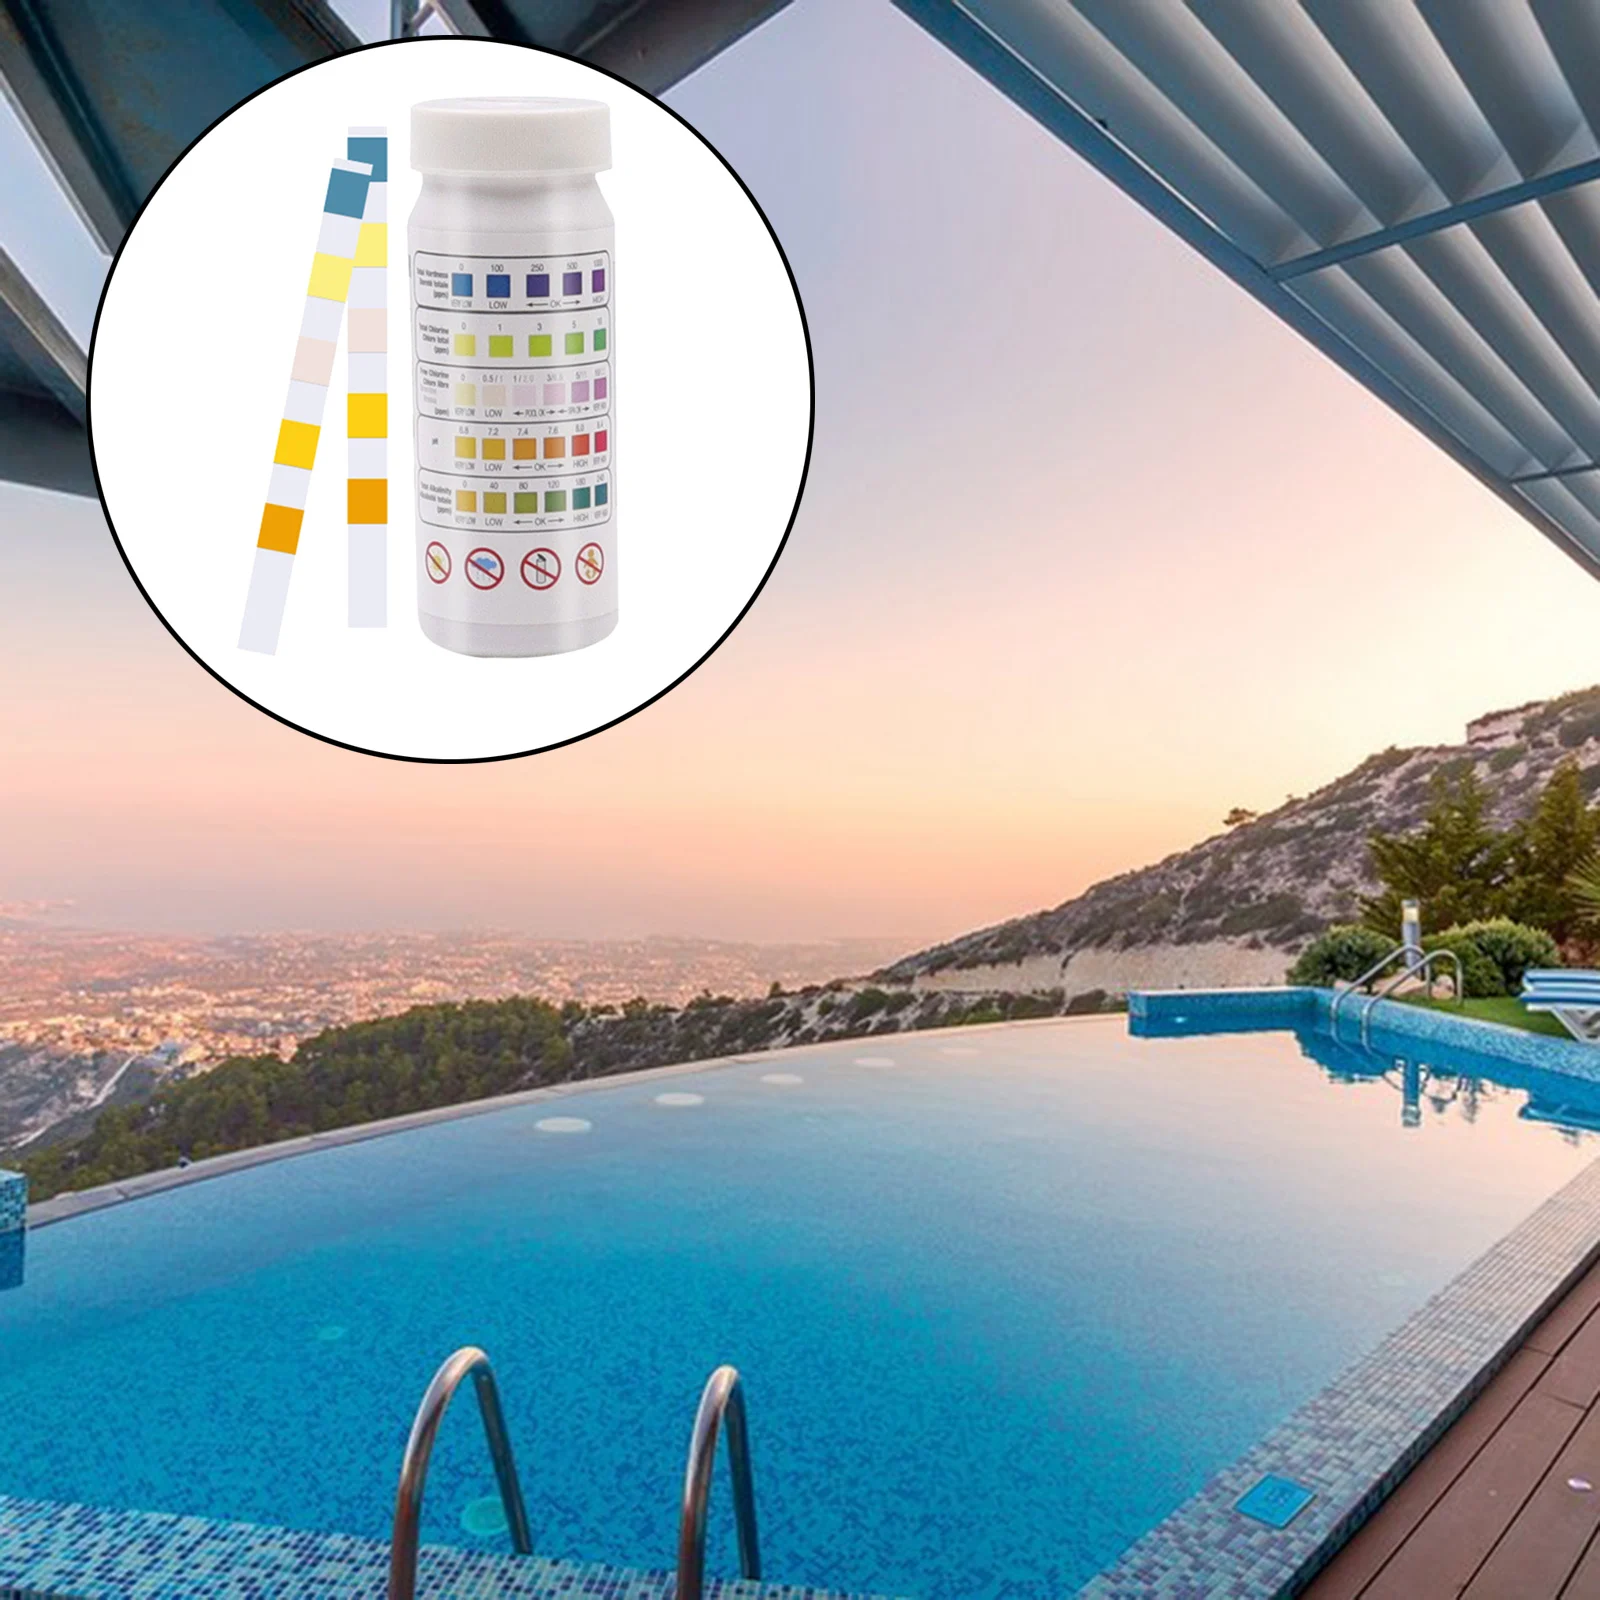 1 Bottle Hot Tub Pool Water Quality 4-in-1 Test Strip Residual Chlorine PH Value Alkalinity Hardness